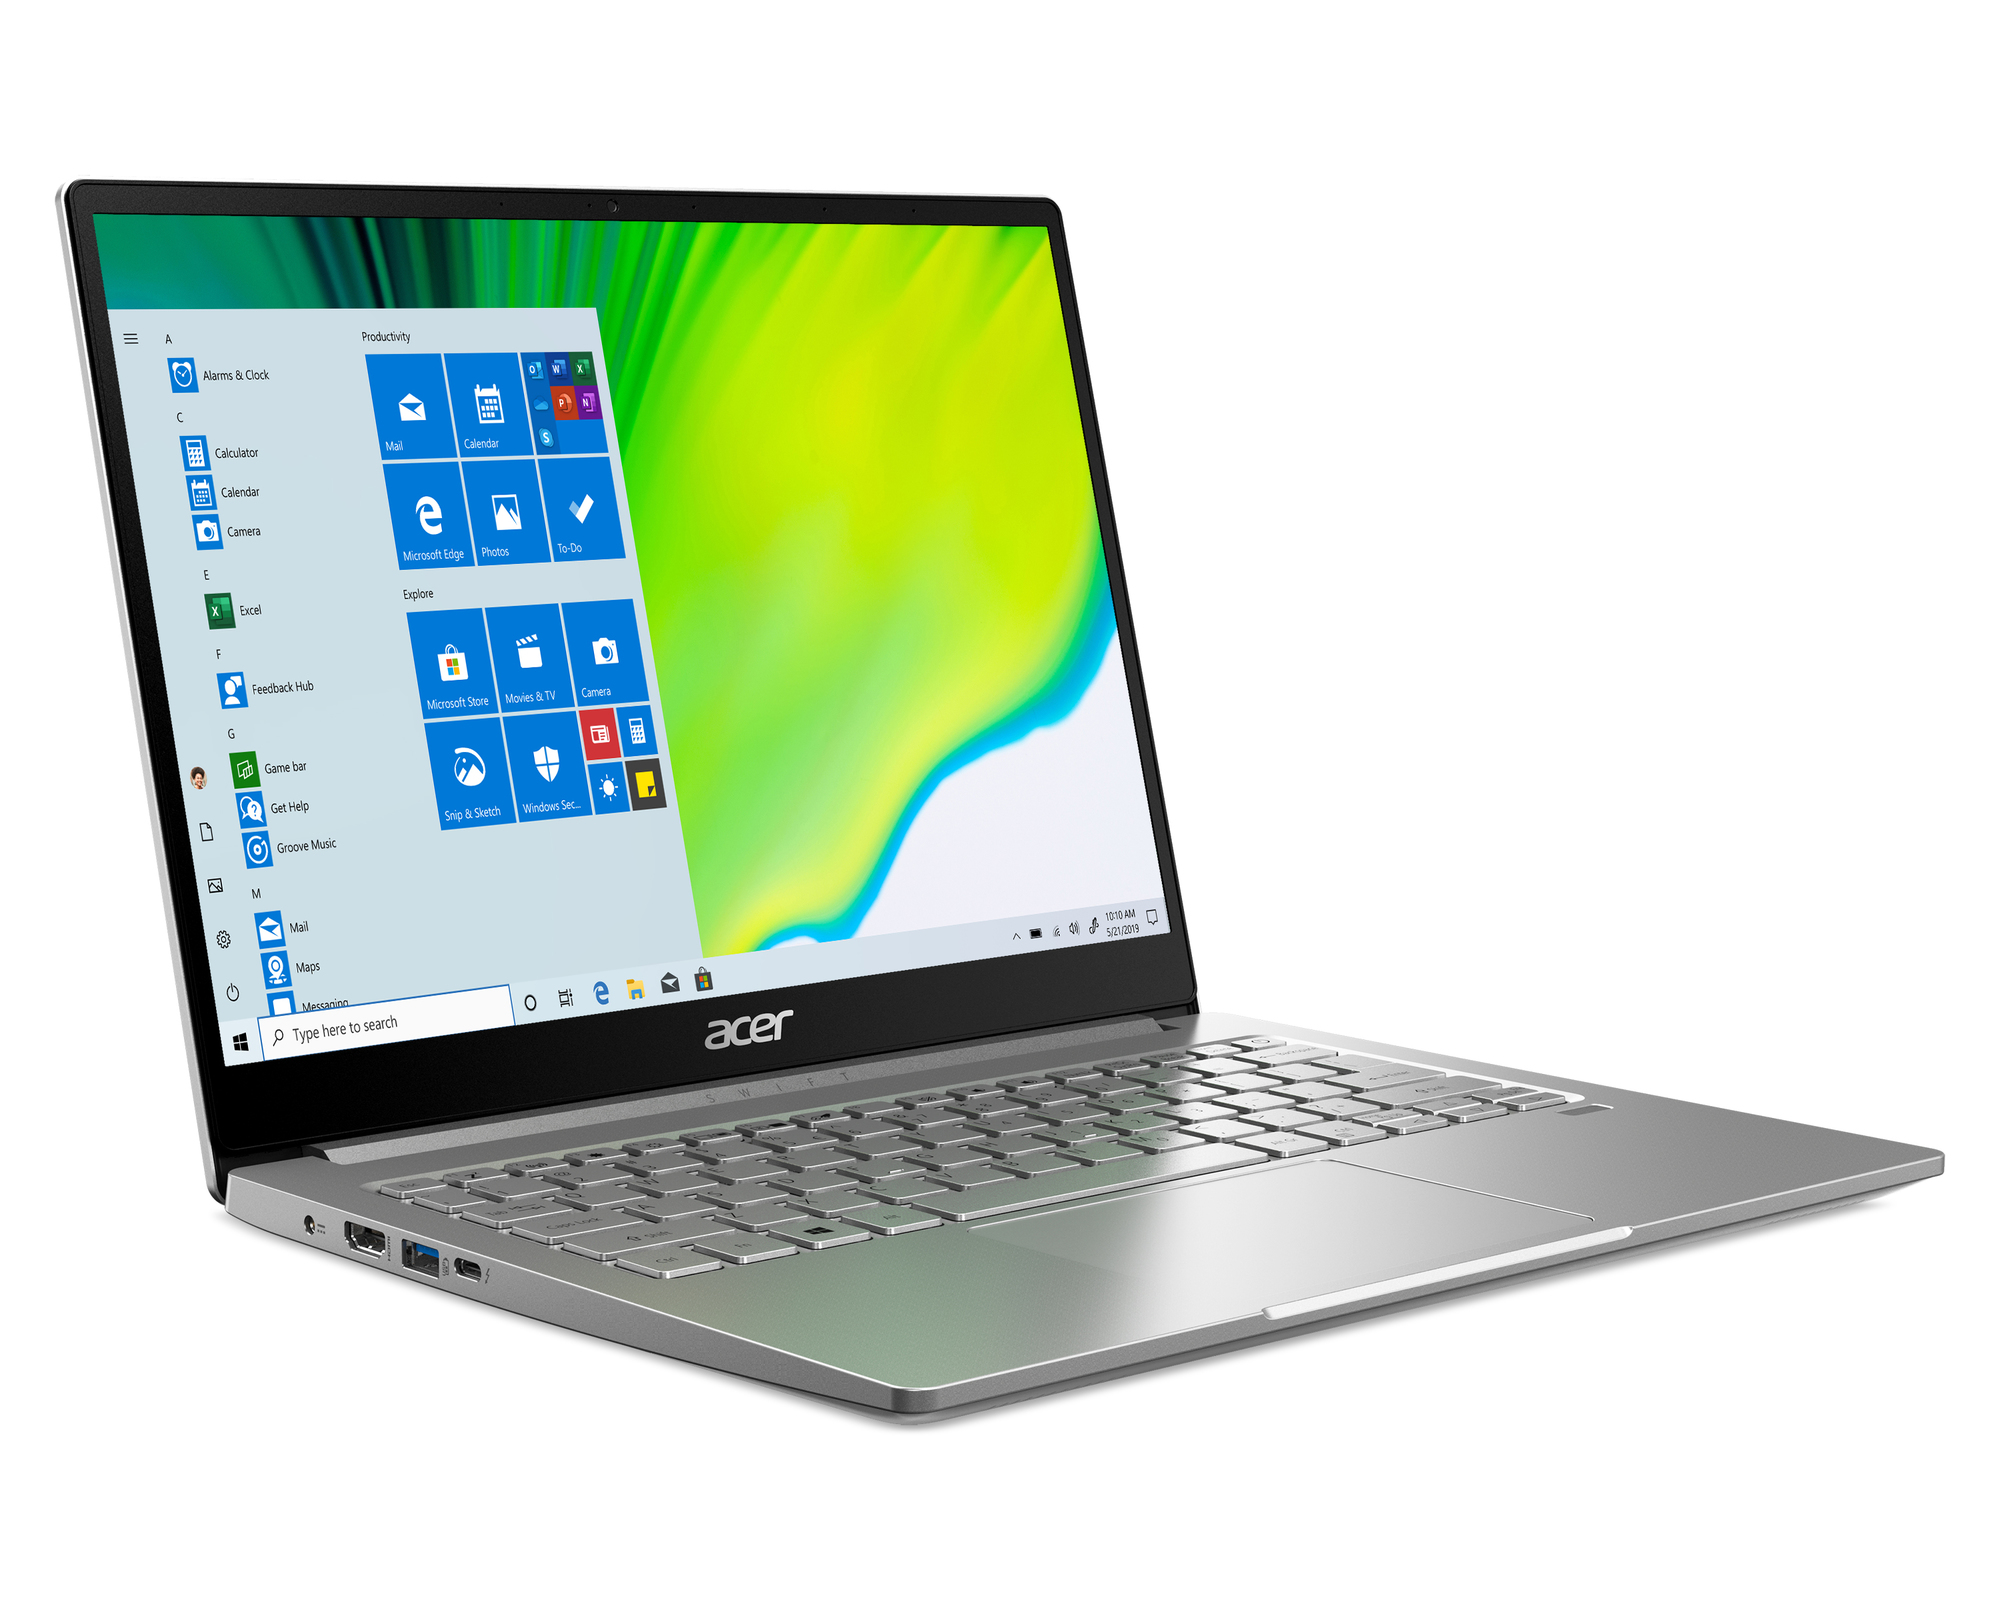 CES 2020: Acer adds two new ultraslim notebooks to its Swift series abf4e901fe33287e695b718944f68437.jpg